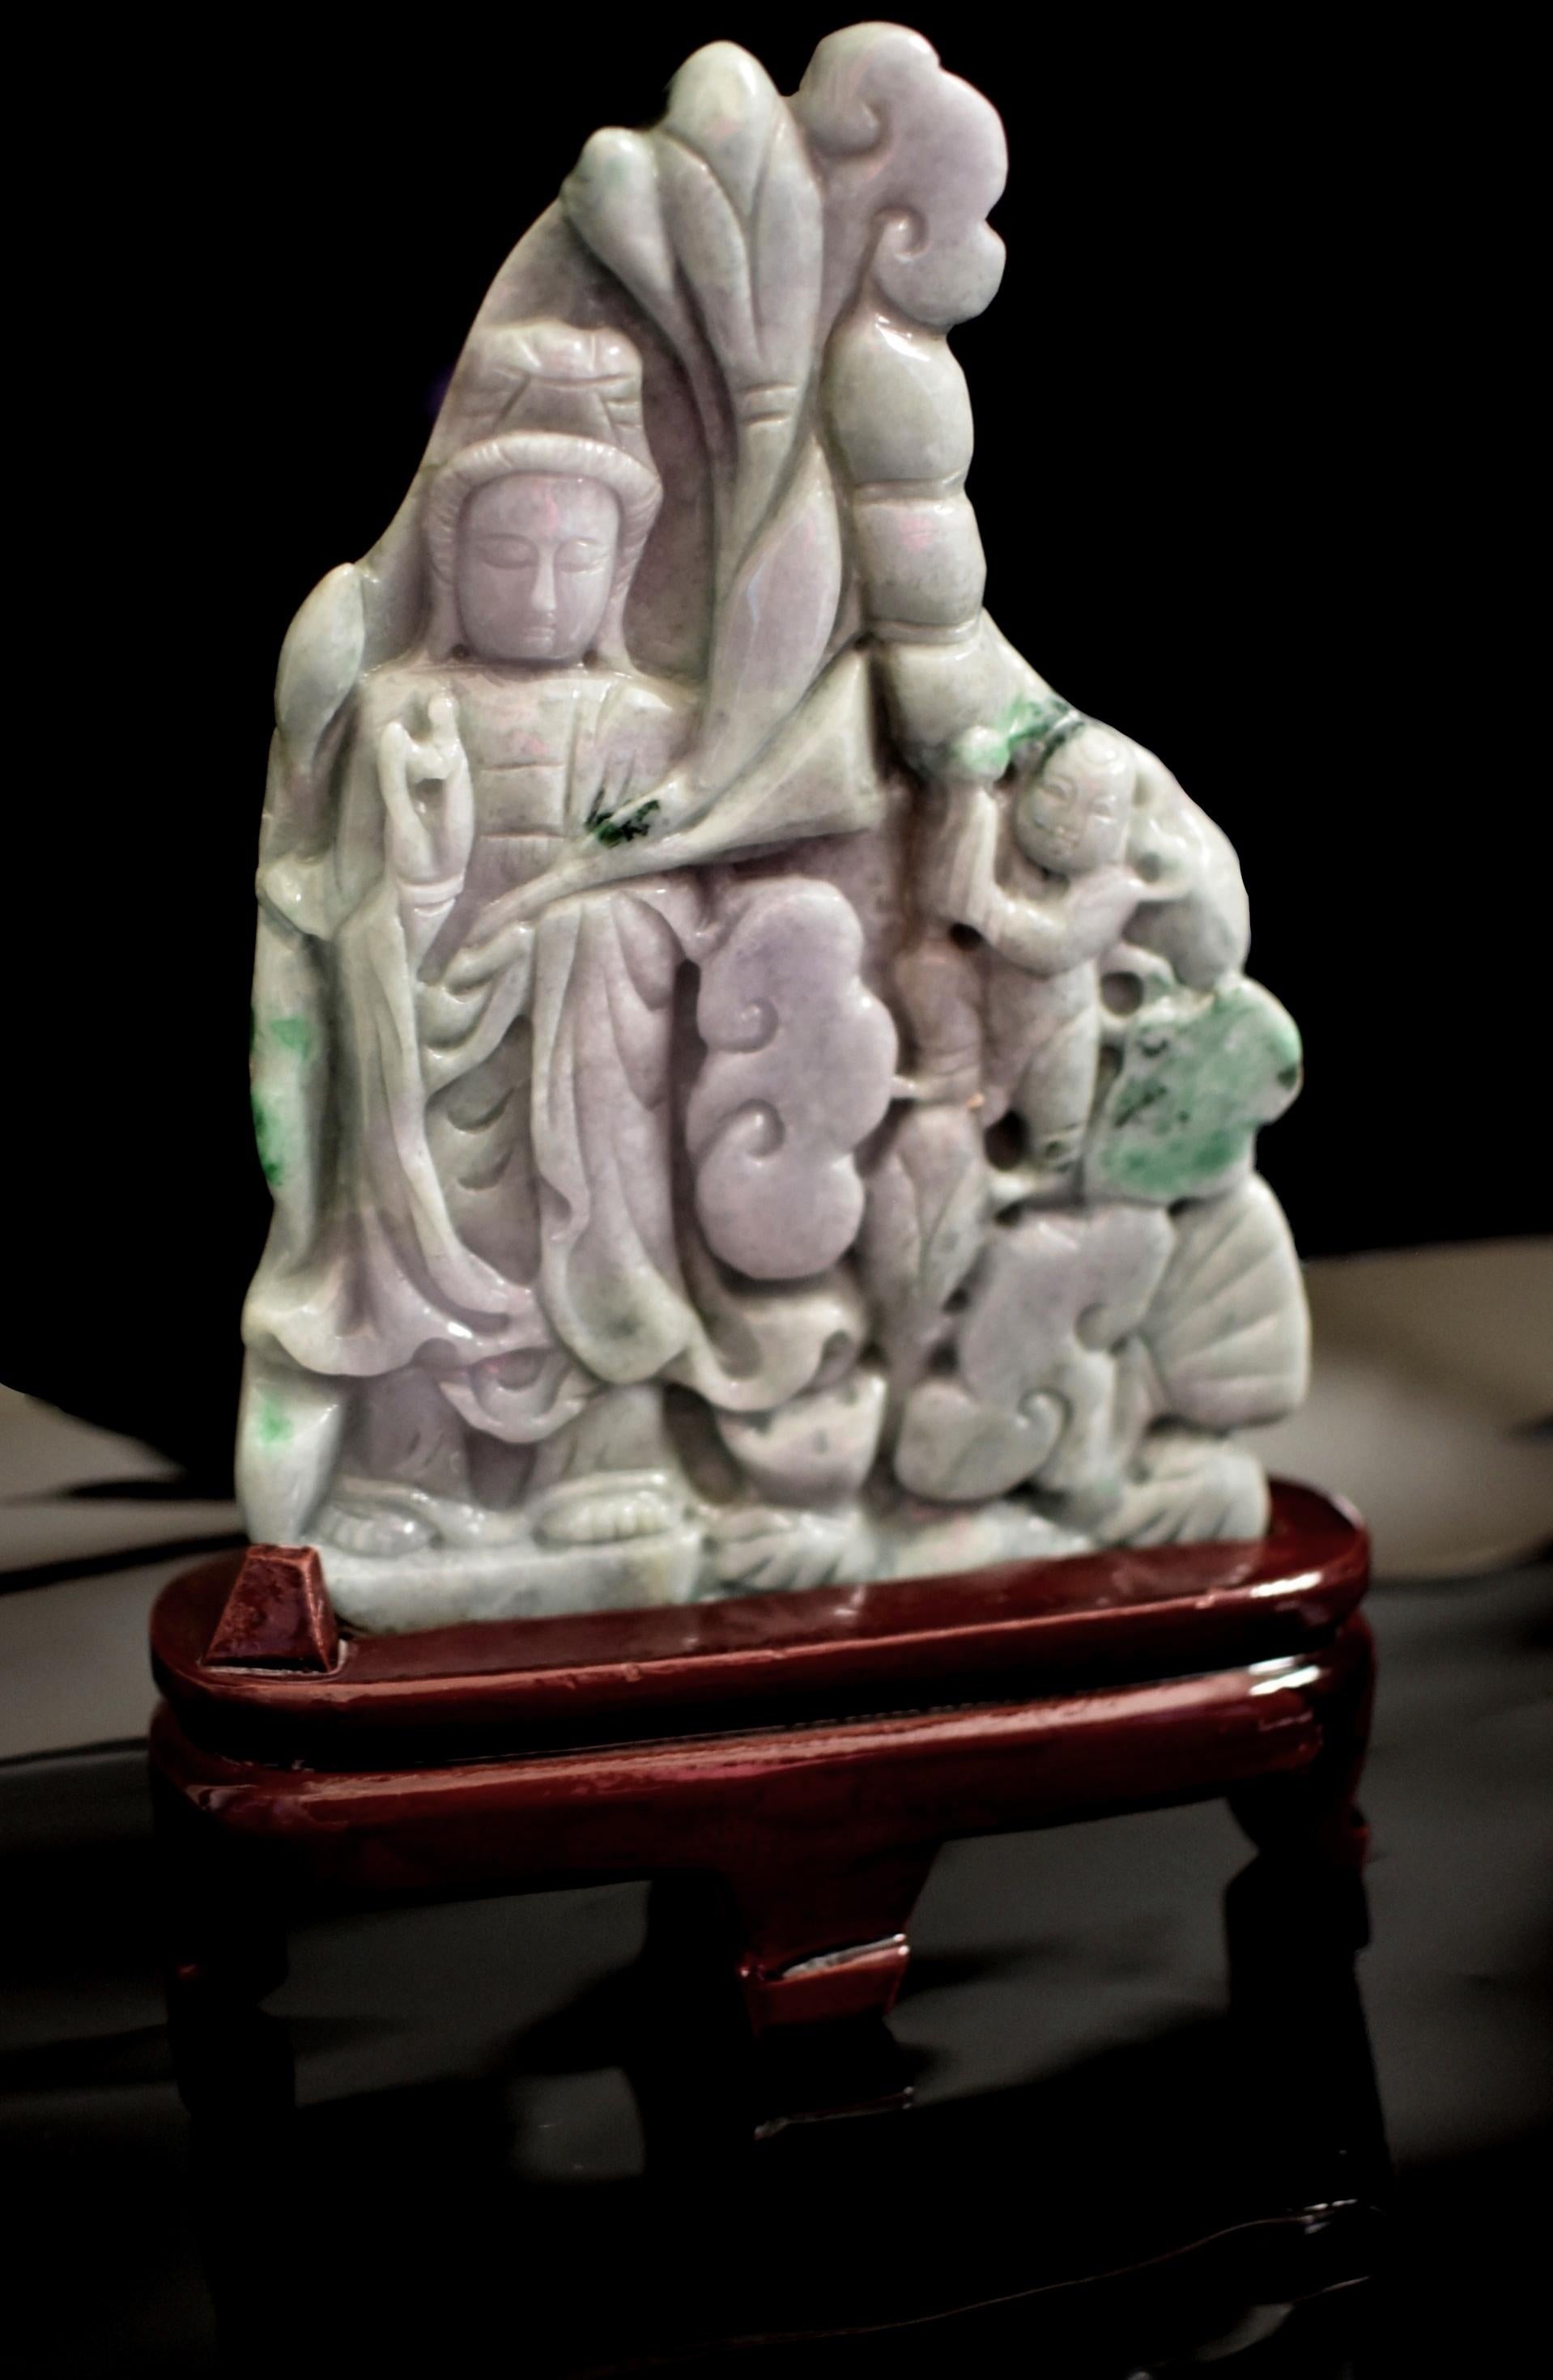 Beautiful, hand carved solid jadeite statue of Kwan Yin and Boy. Kwan Yin has a full face with arched eyebrows and downcast eyes casting a serene aura. She wears a long fluid robe with a hood framing her face. A boy on her left symbolizes fertility